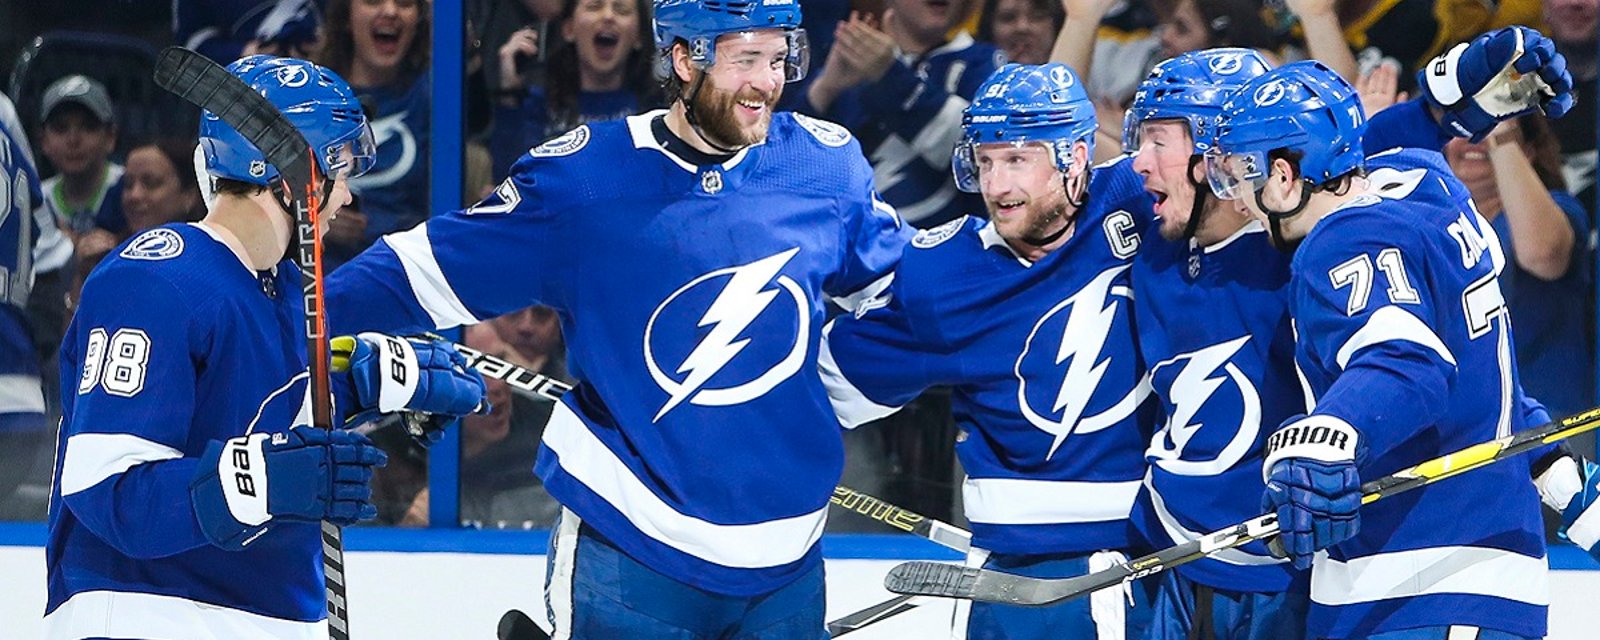 Breaking: Lightning star missing in the third period, team confirms he has been injured.